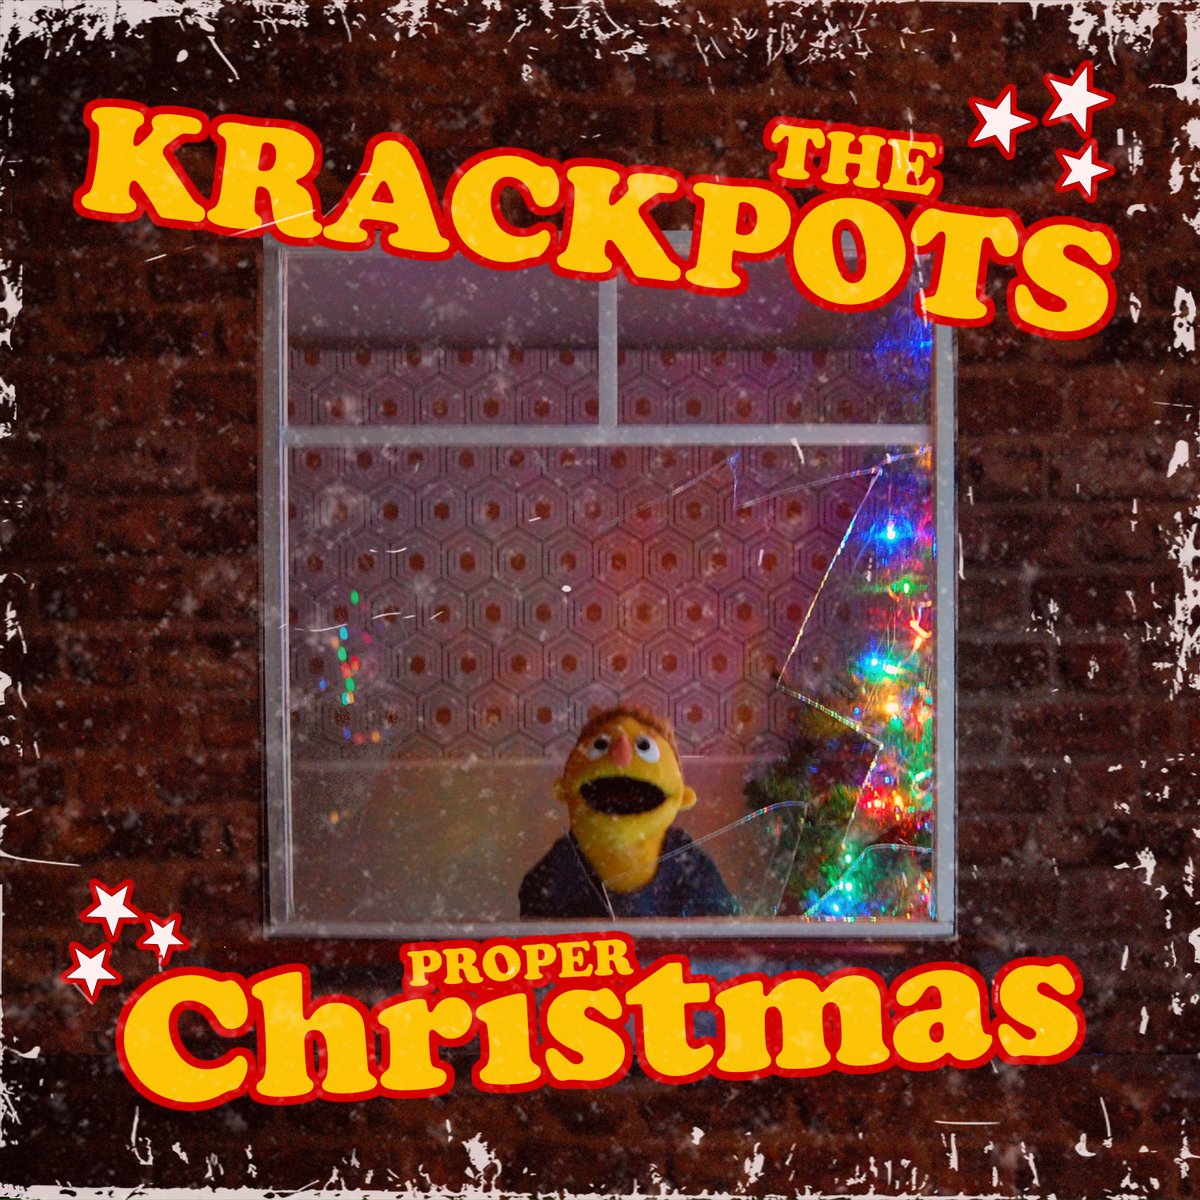 Lovely write up about The Krackpots Proper Christmas in Clash Magazine:
clashmusic.com/news/the-krack…
#Christmas2023 #Christmas #ChristmasSongs #christmasnumberone